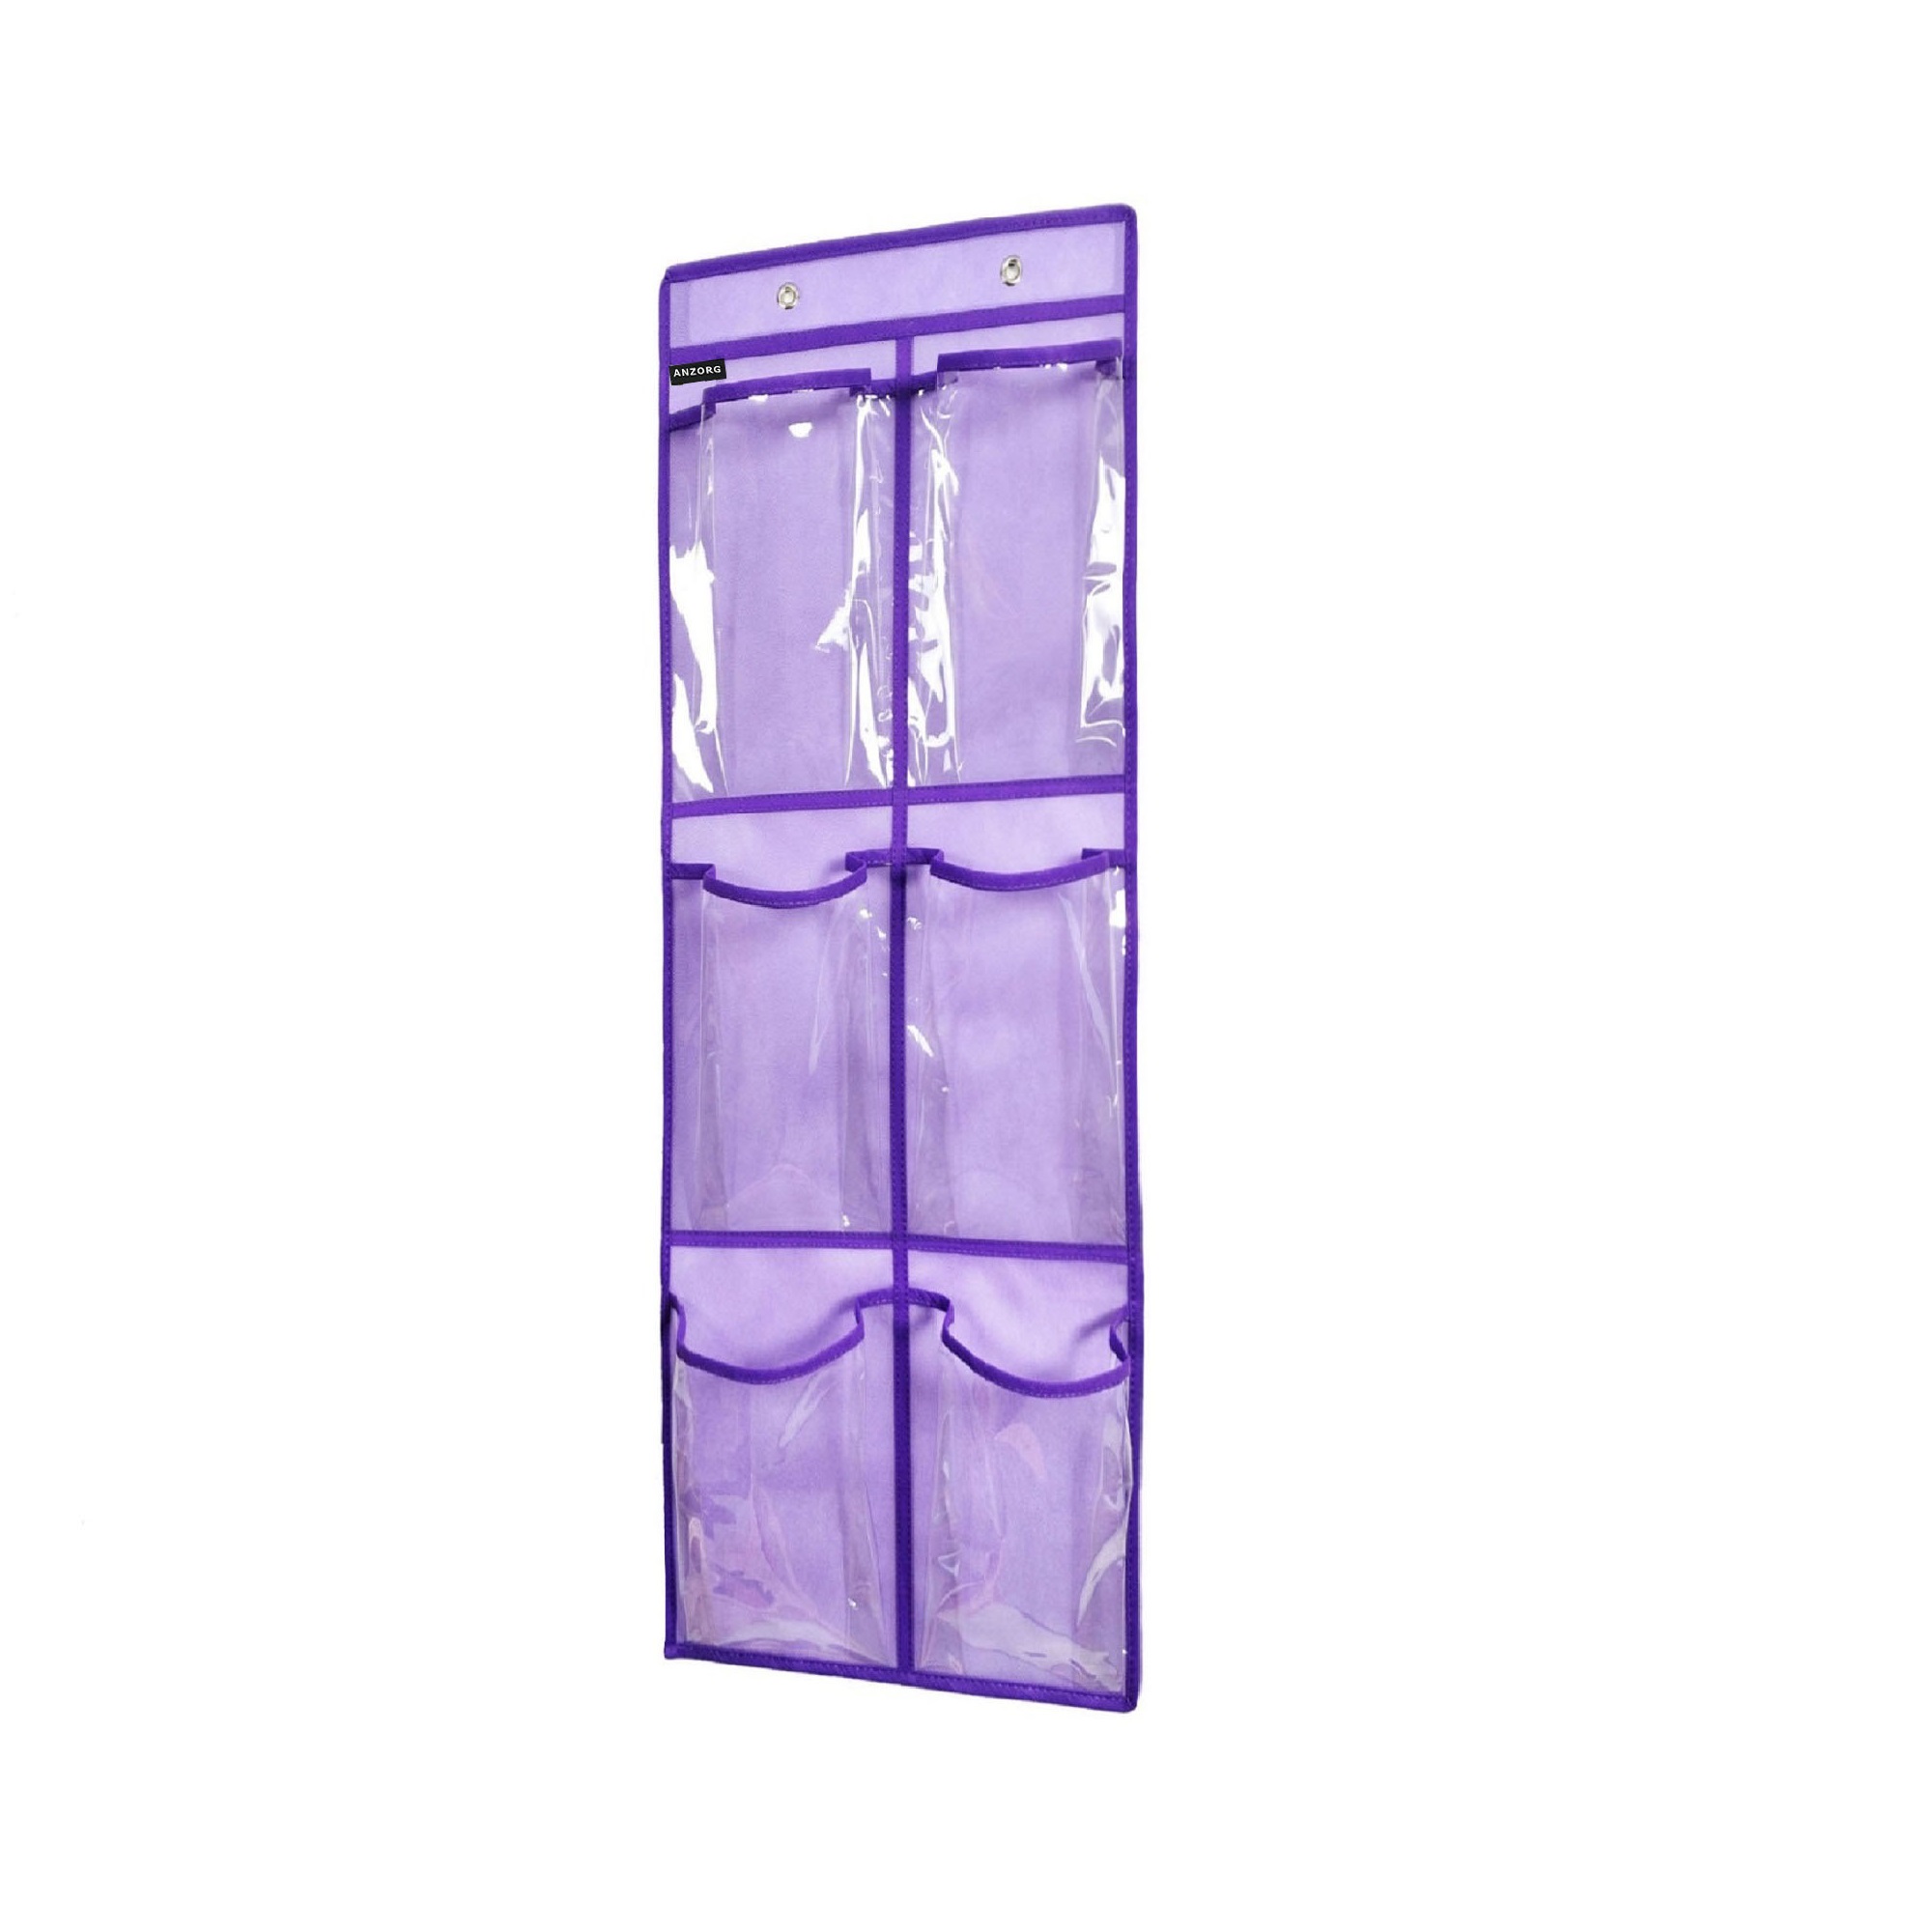 Over the Door Shoes Rack 6 Layer 24 Pocket Crystal Clear Organizer, 1 unit  - Pay Less Super Markets